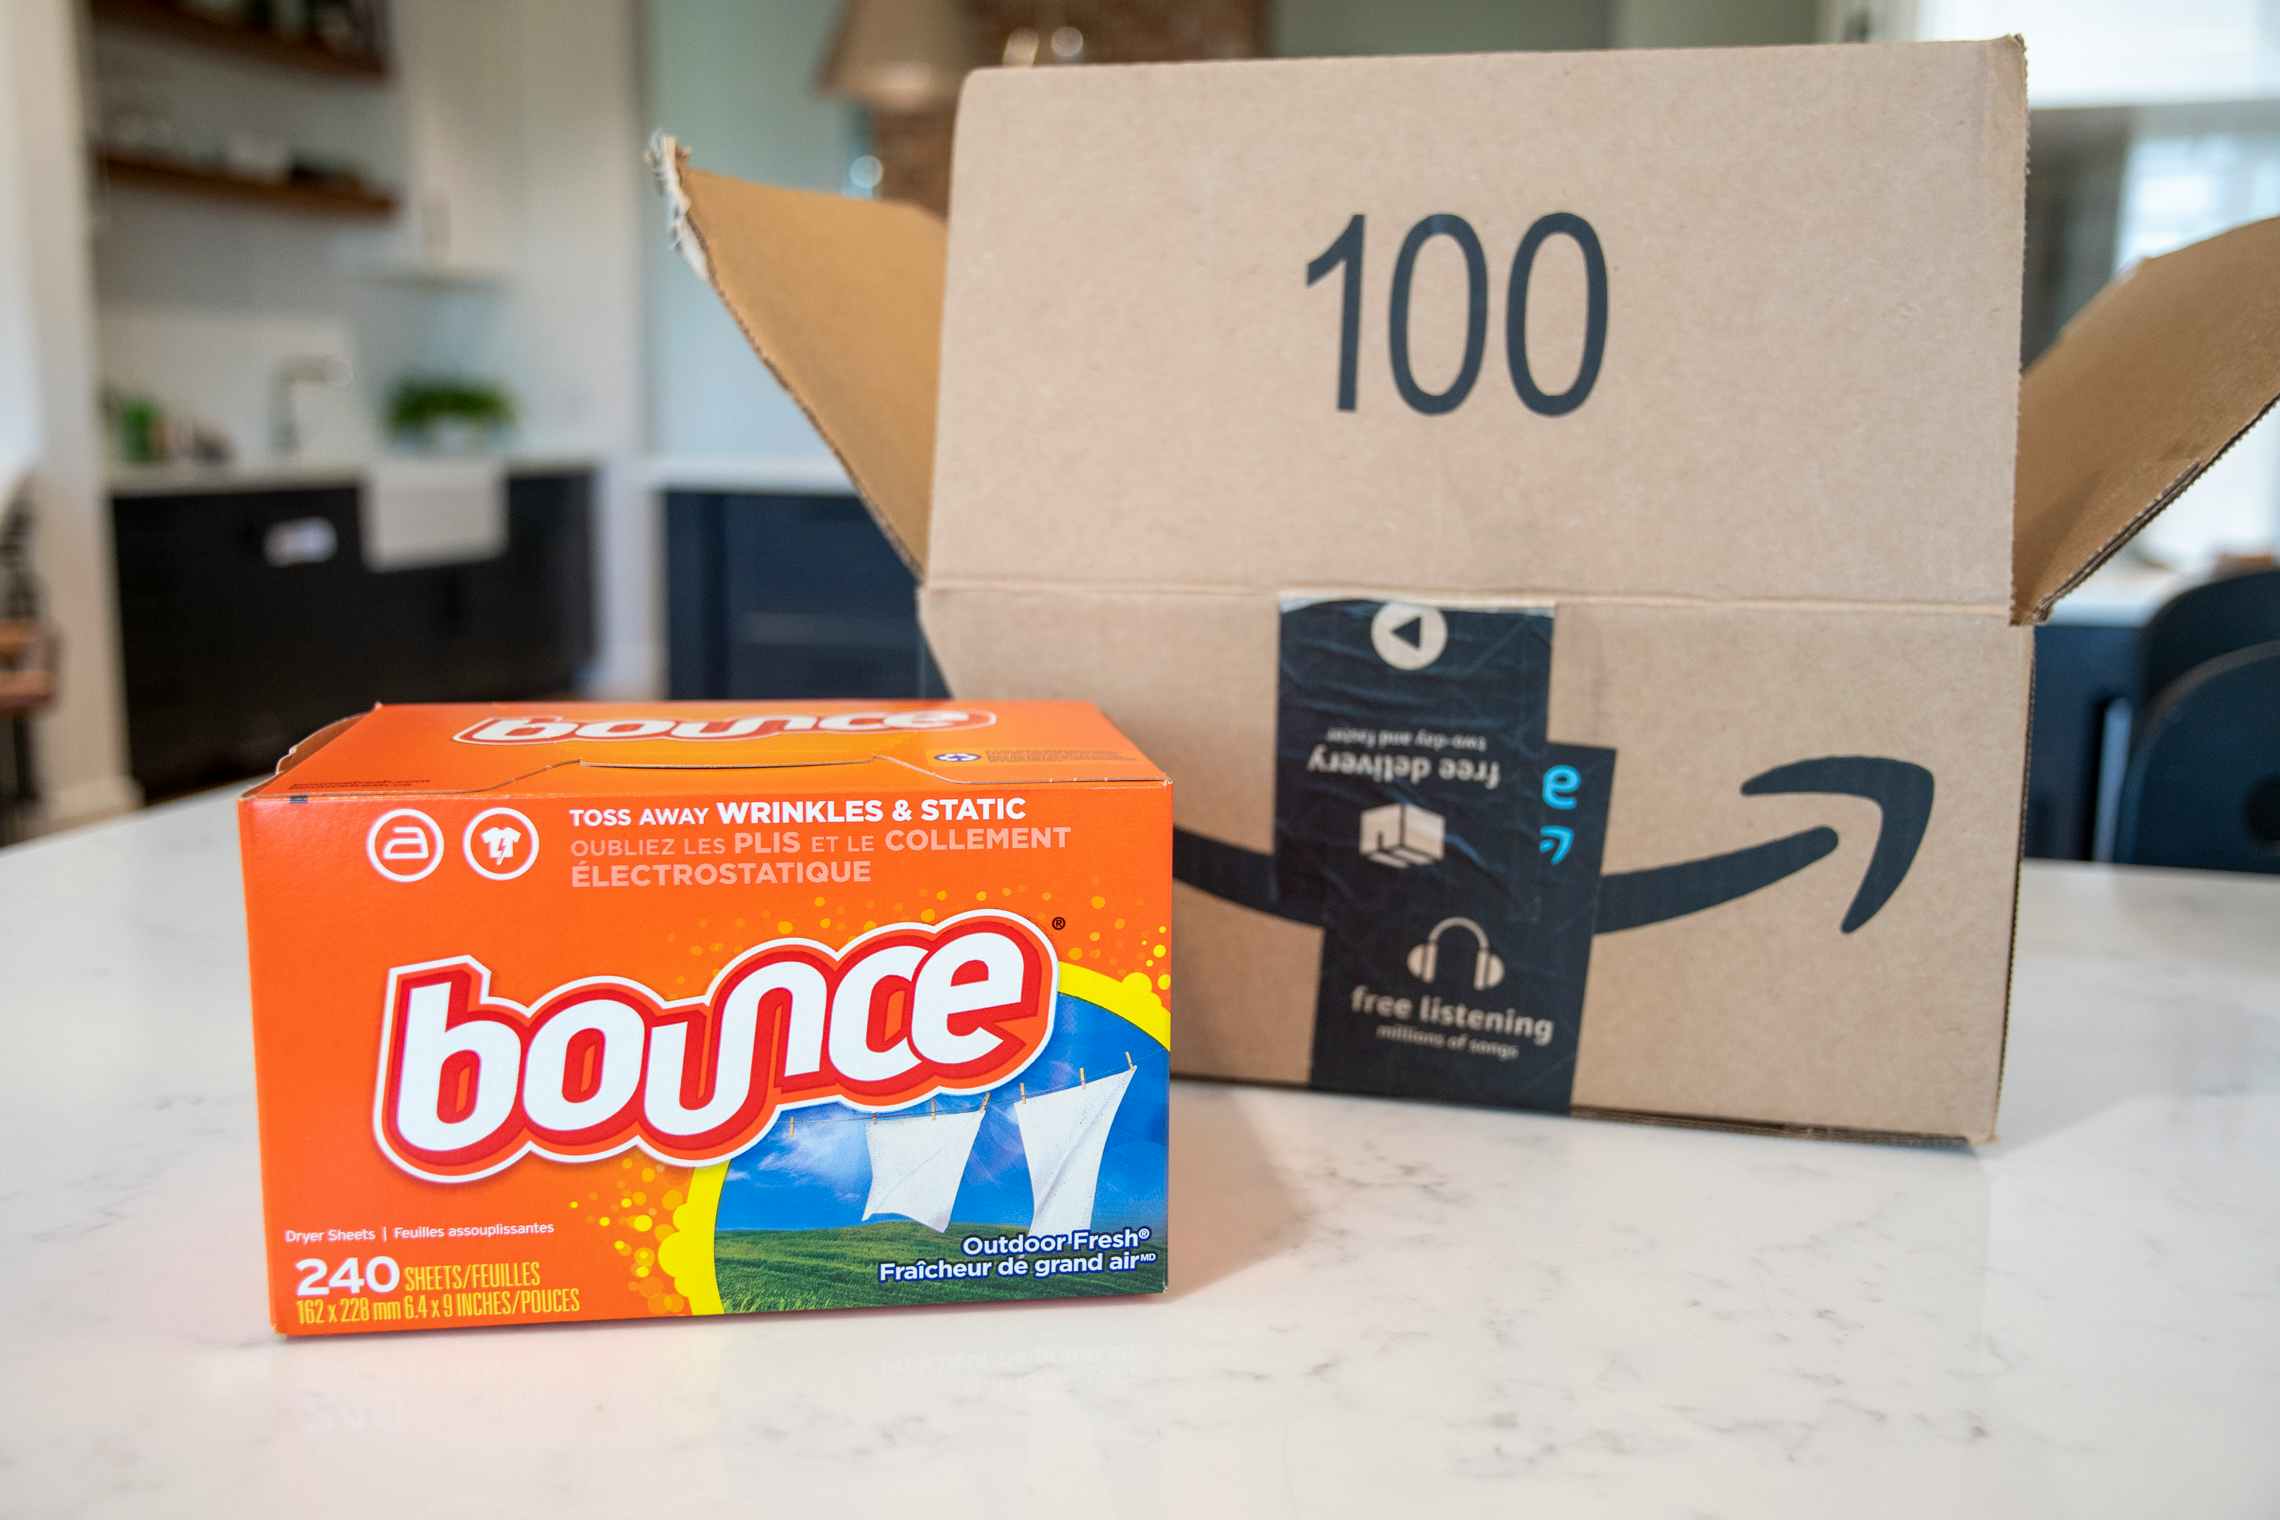 Bounce dryer sheets next to an amazon box